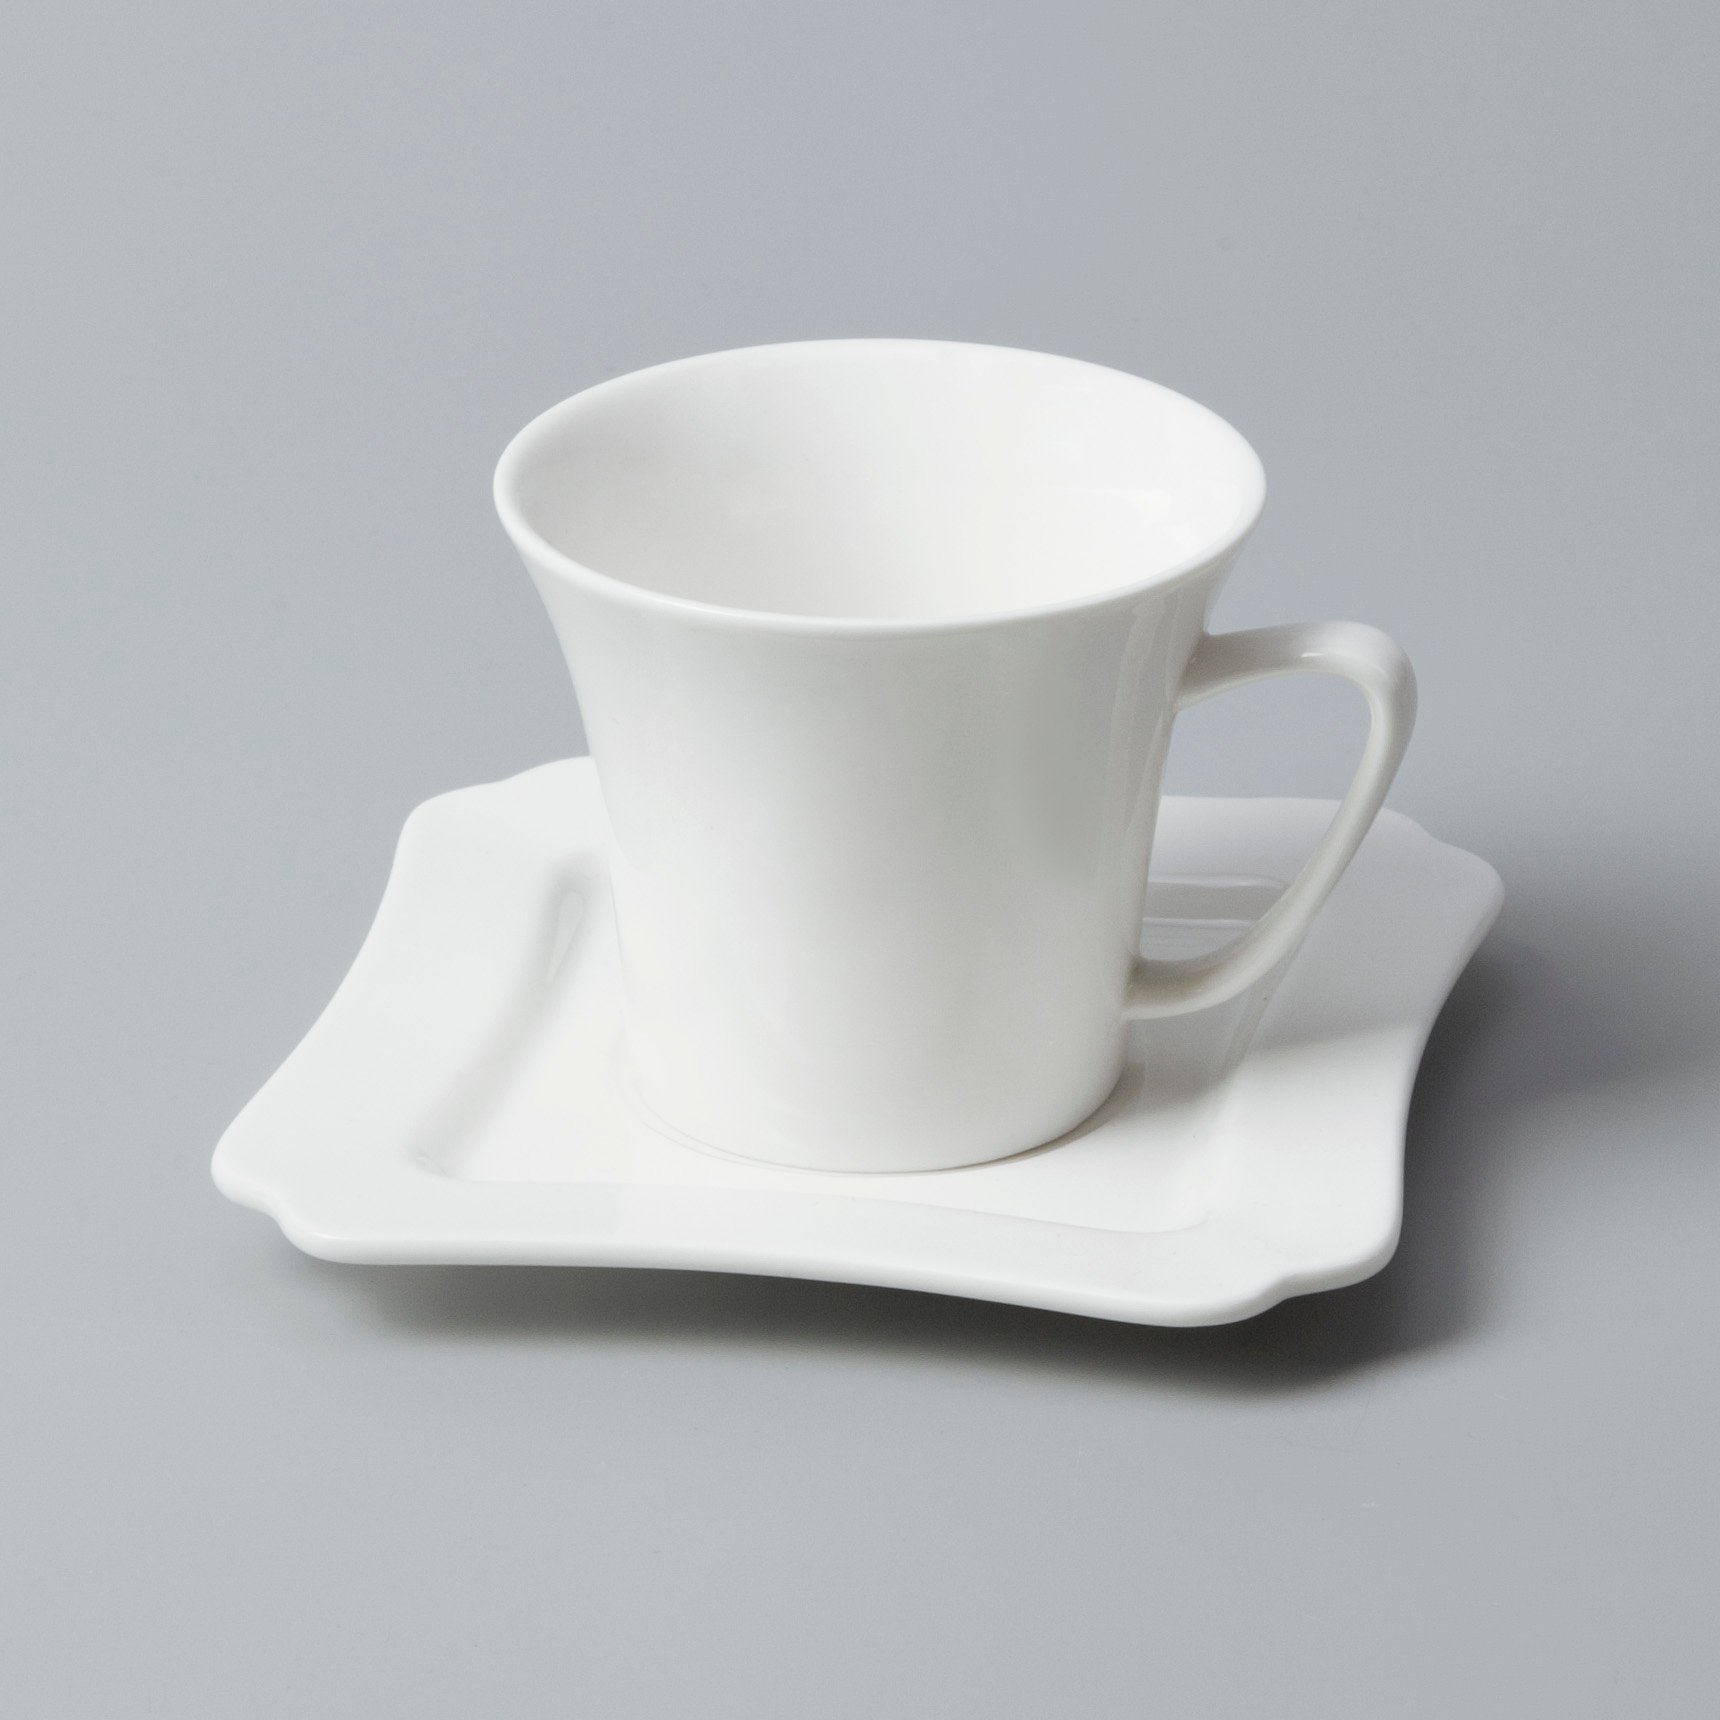 Two Eight hotel crockery online india Suppliers for restaurant-8